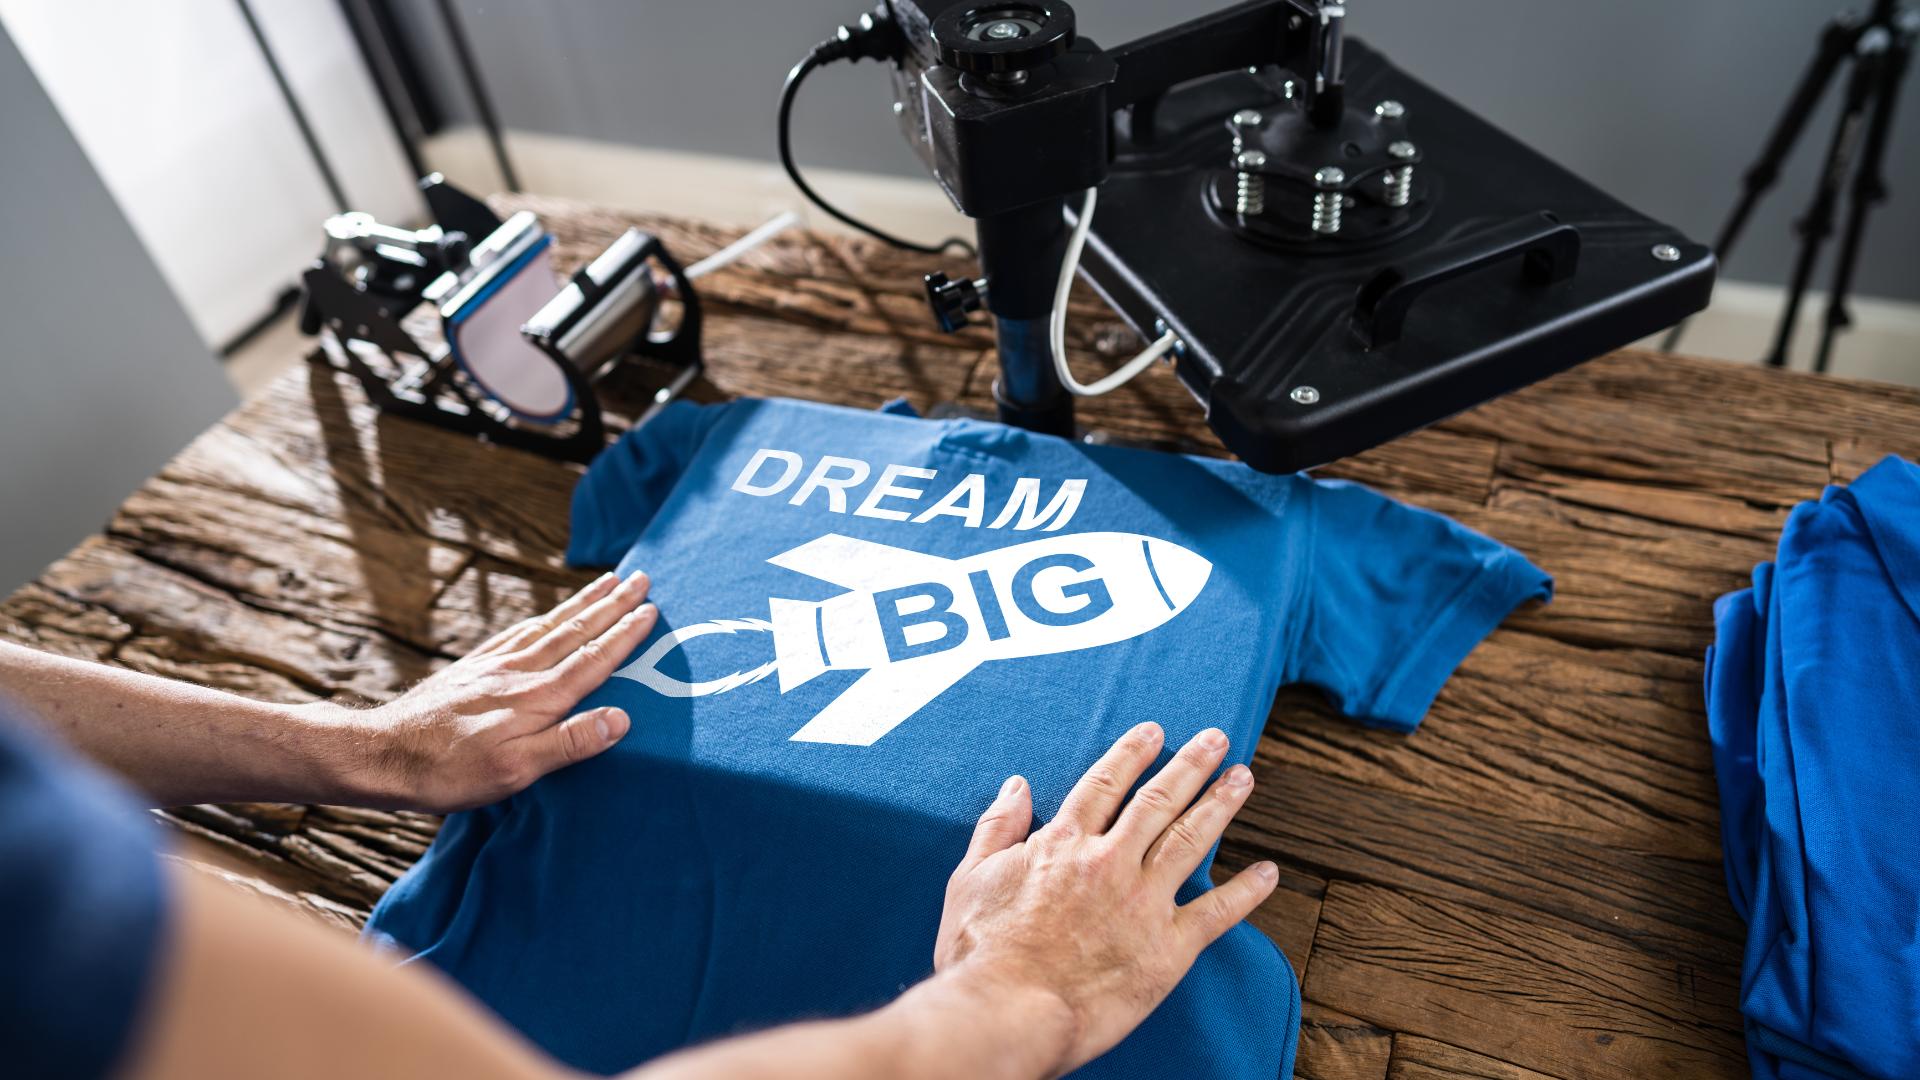 Top 10 Best T Shirt Printing Machines in 2023